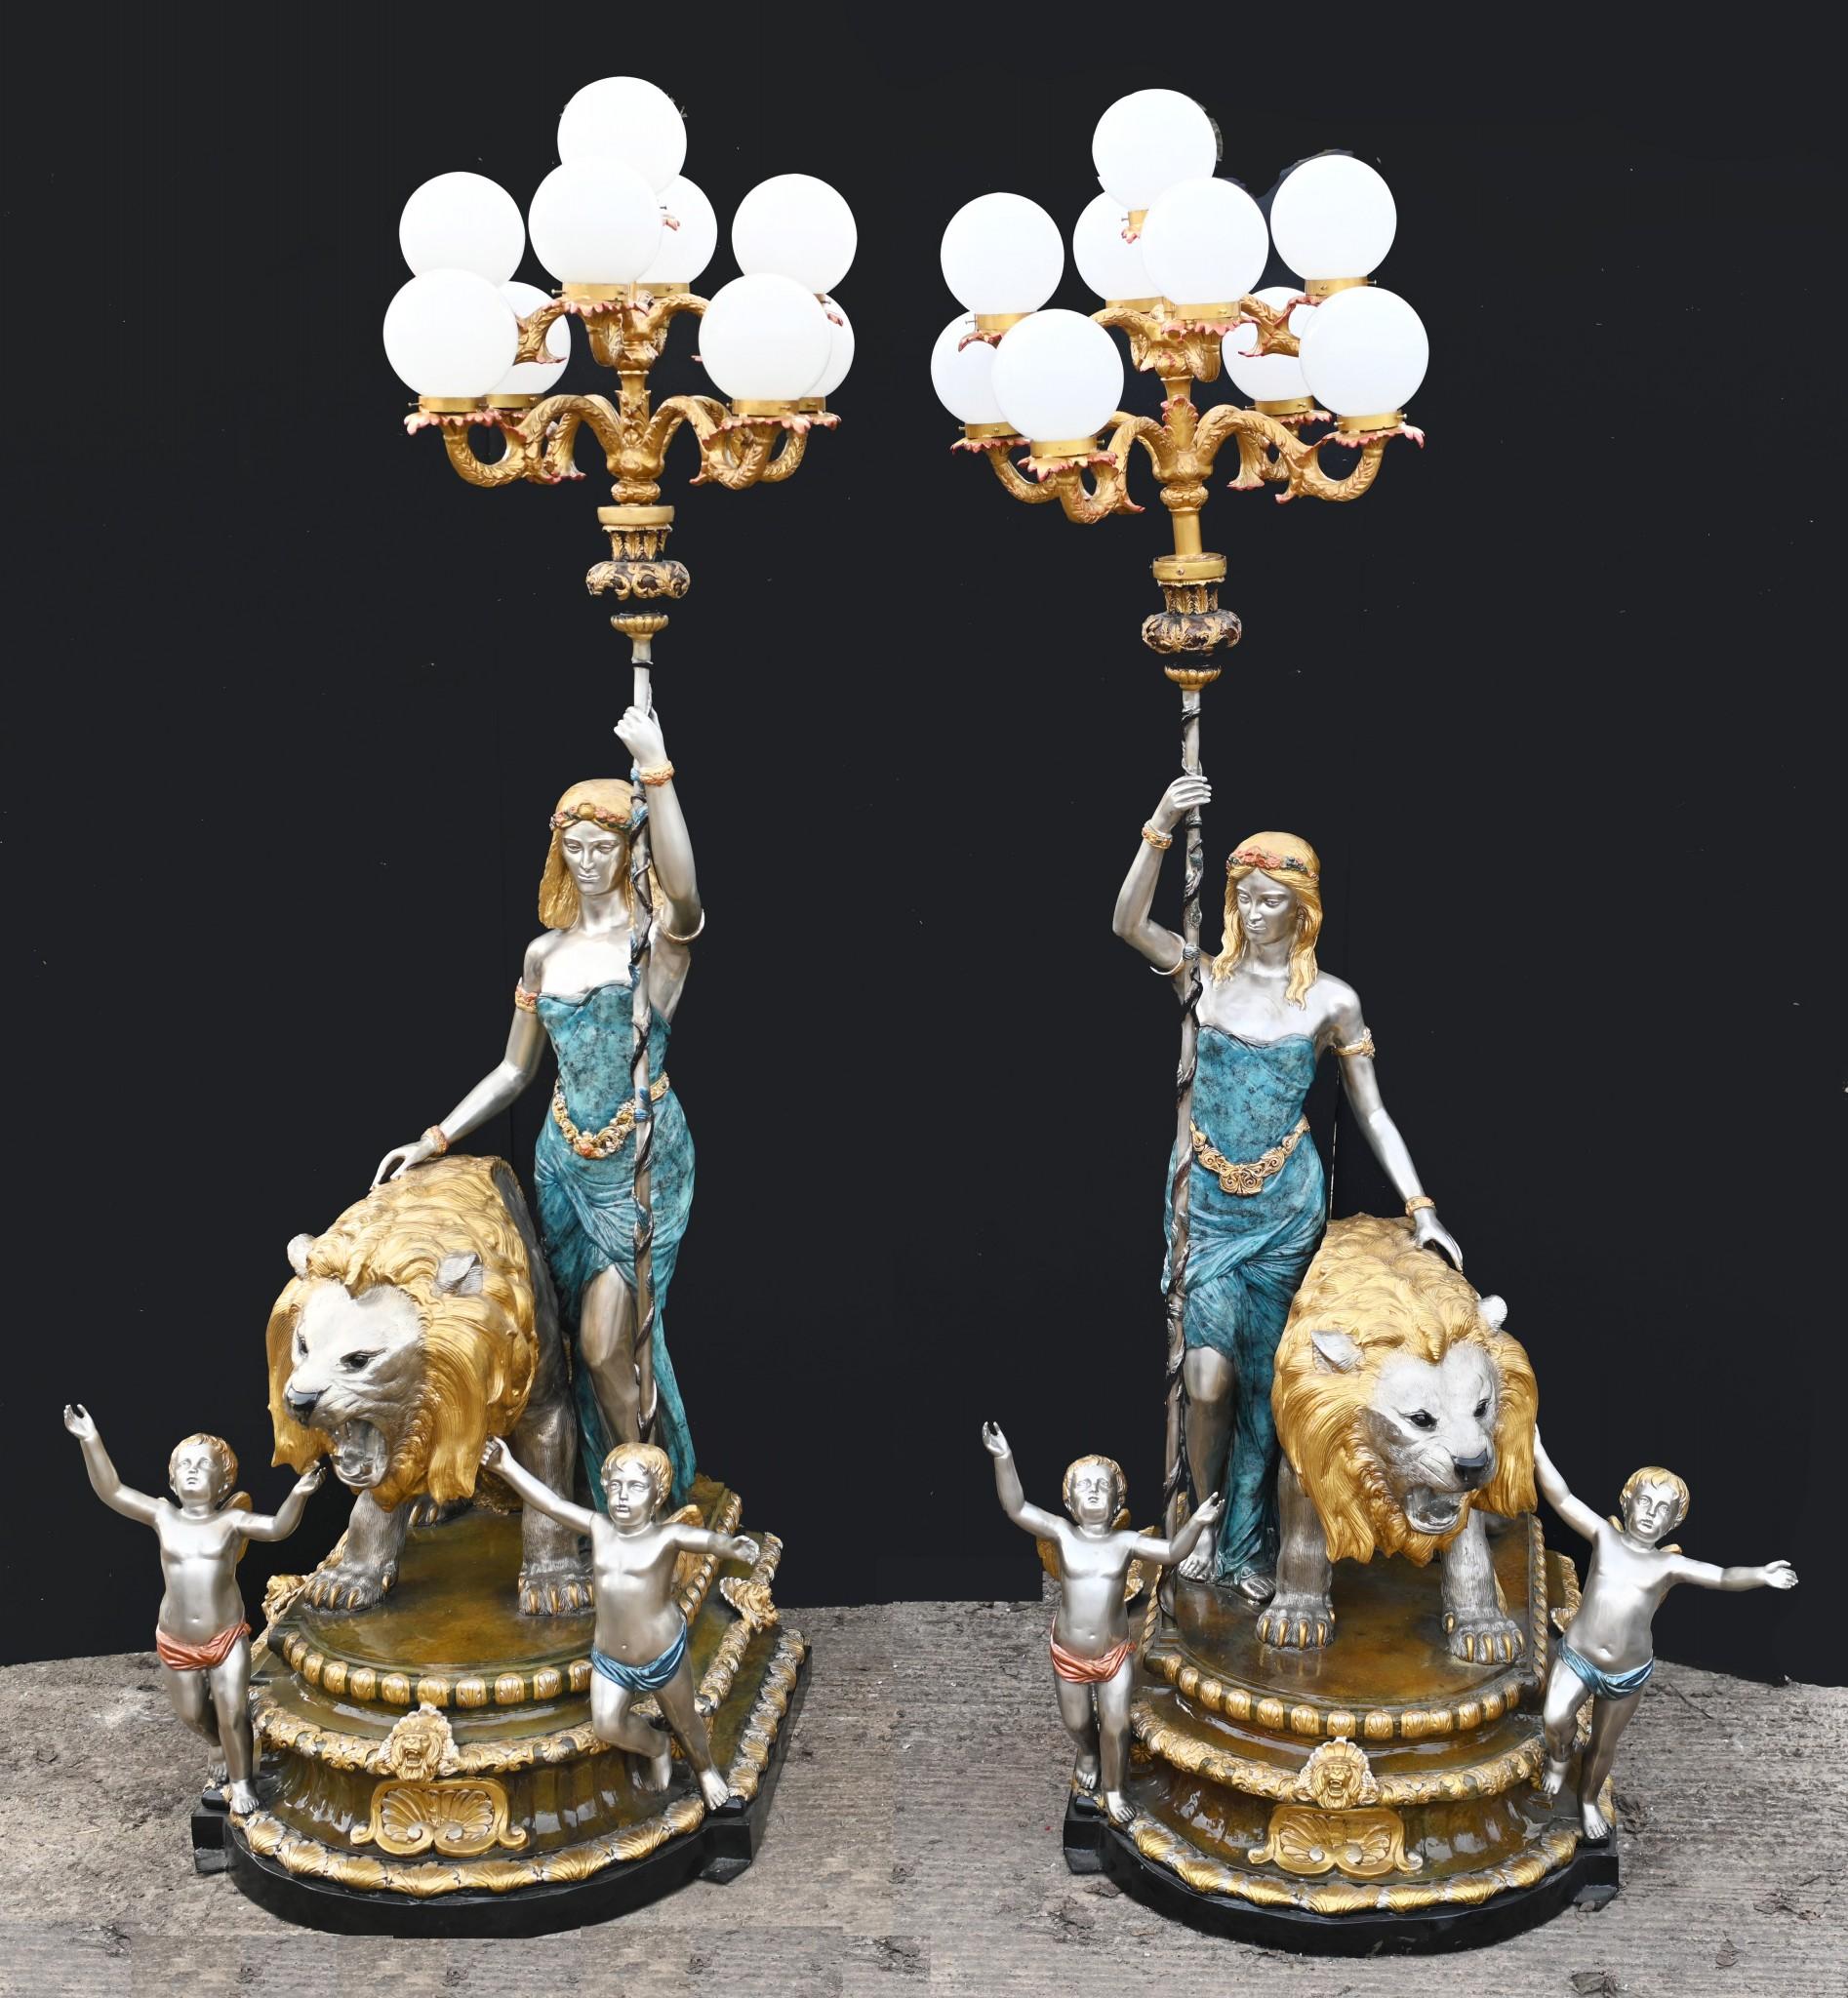 Wow - stunning pair of giant Italian bronze candelabras
stand in at ten feet tall - 304 CM over three metres!
Glorious polychrome finish to the statues
Main candelabras are held aloft by the female maidens
Flanked by the roaring lions and pair